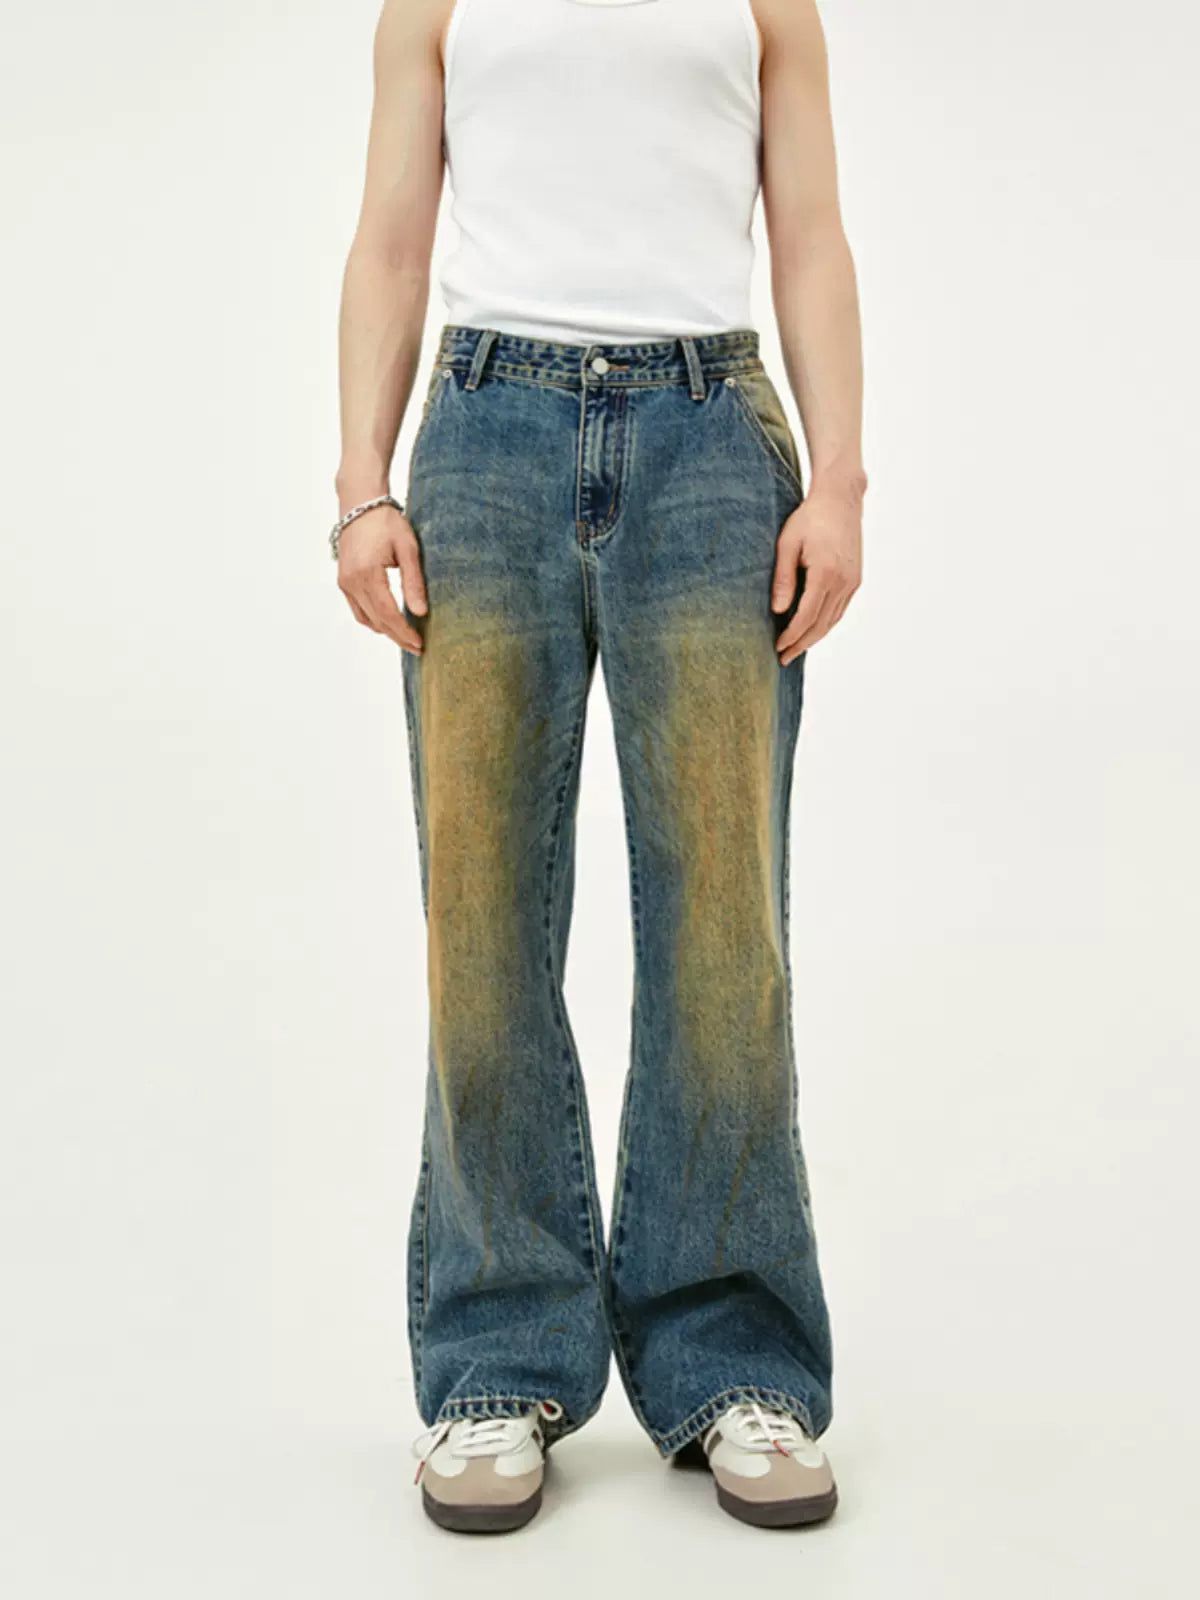 Rust Fade Spots Jeans Korean Street Fashion Jeans By Made Extreme Shop Online at OH Vault